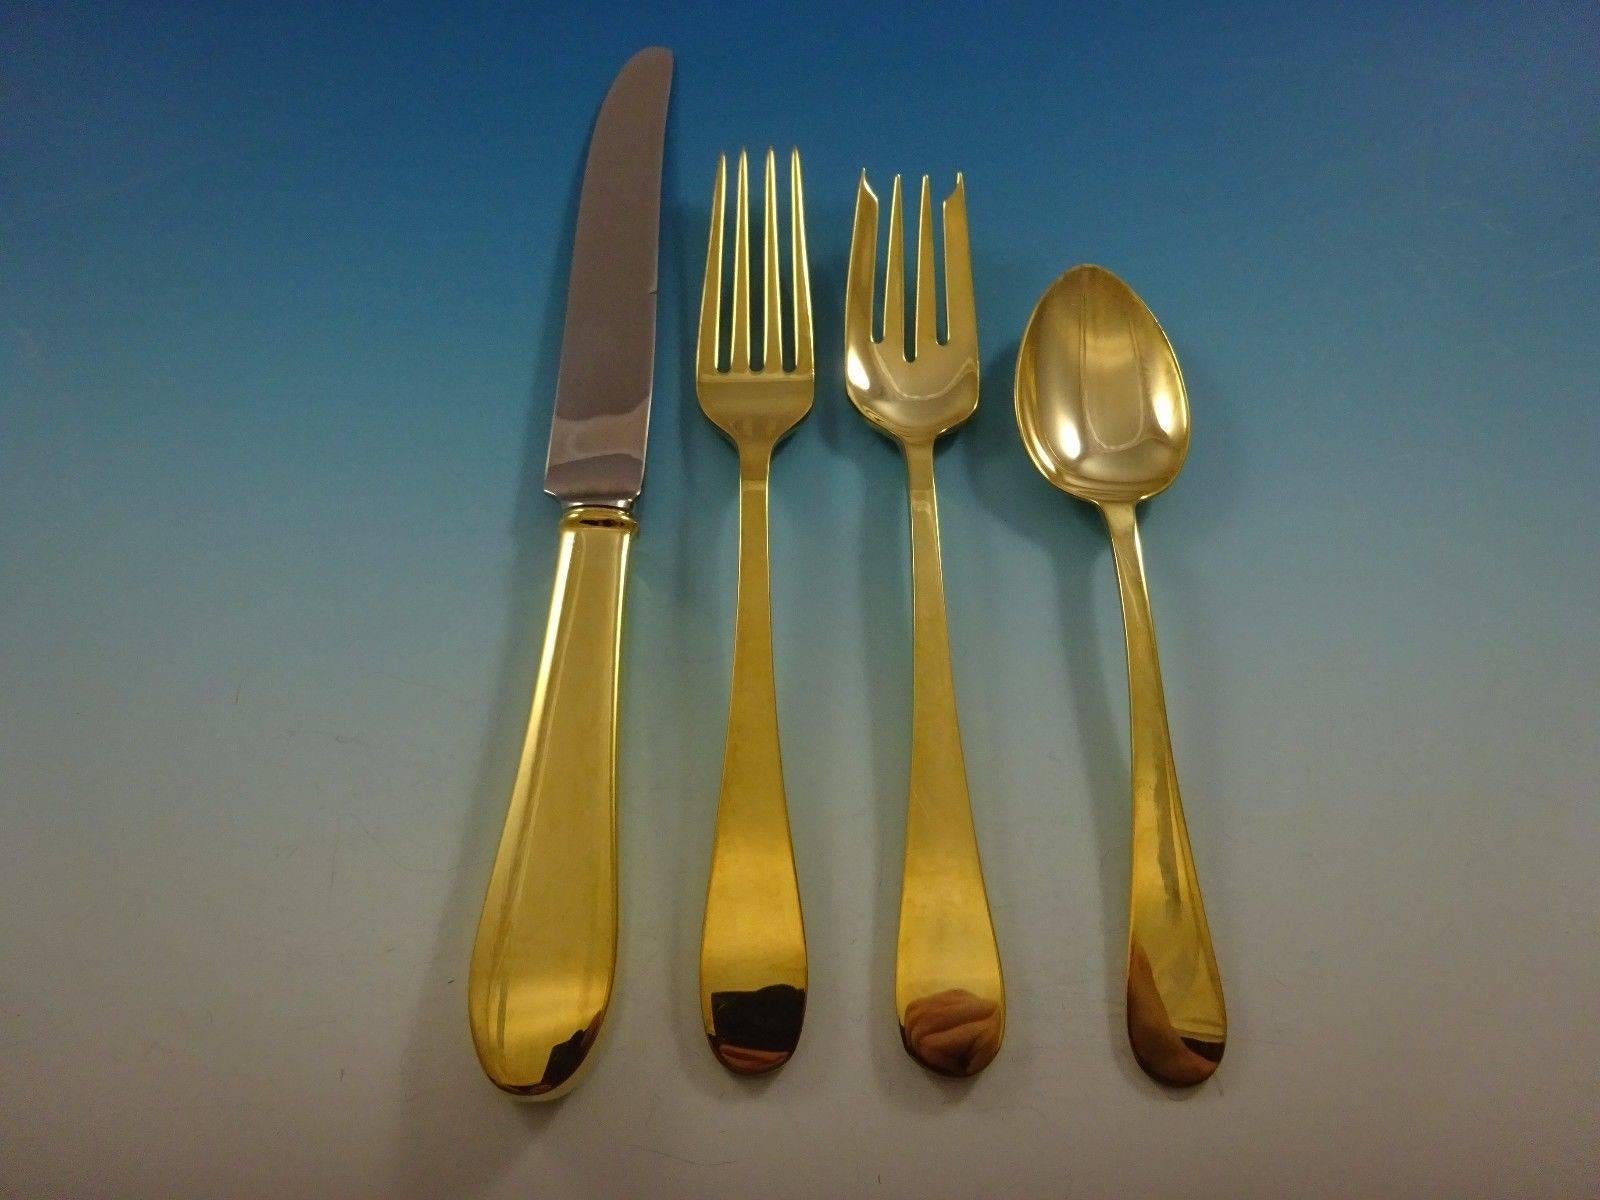 Salem gold by Tiffany and Co. sterling silver flatware set, 24 pieces. This set is vermeil (completely gold-washed) and includes: 

Six knives, 8 1/2